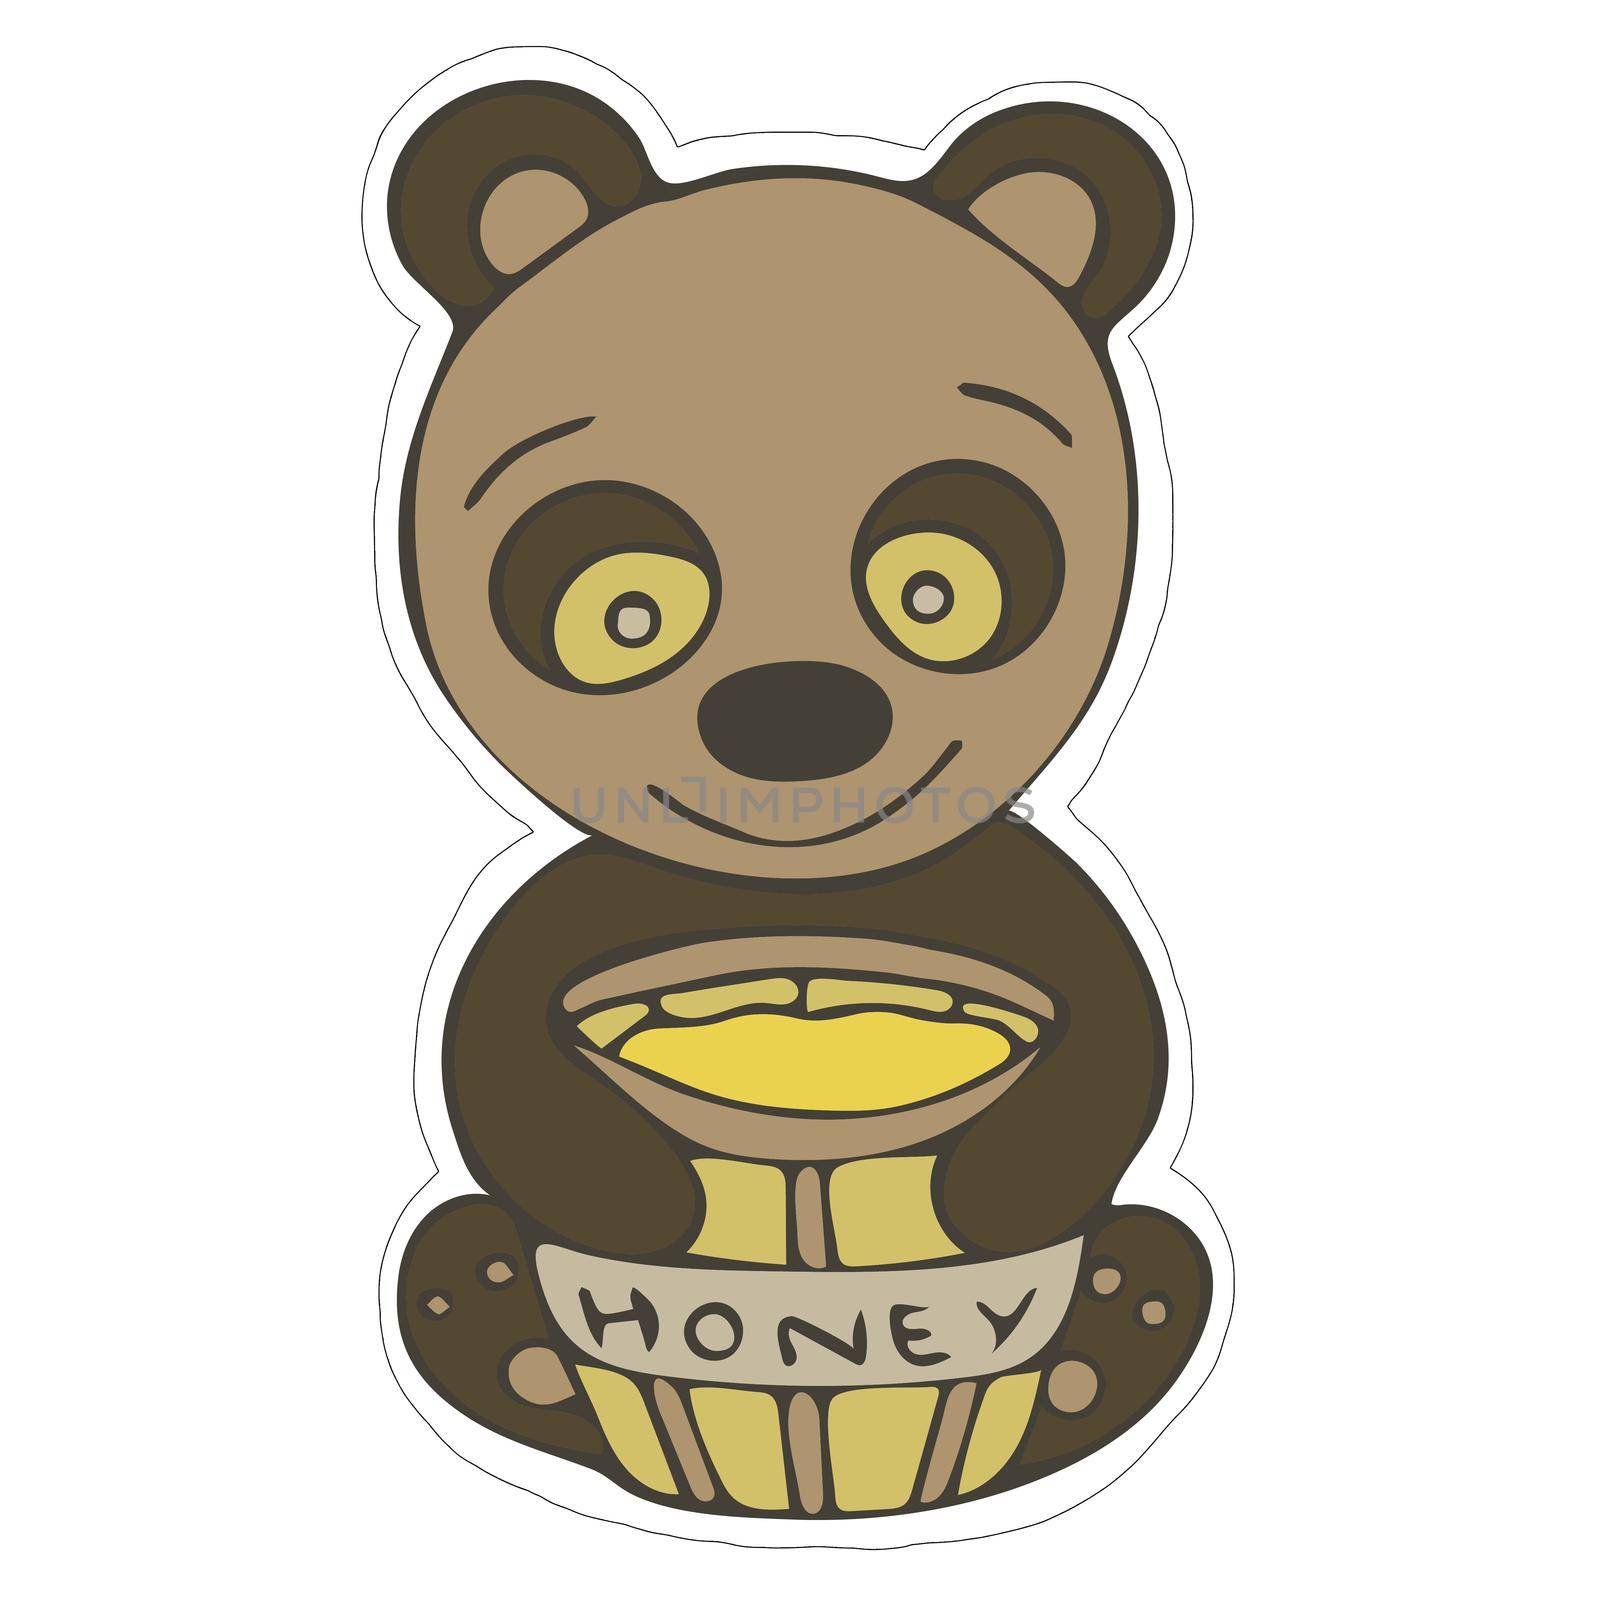 Hand-drawn Cute Bear with Honey Sticker. Isolated Bear on White Background.